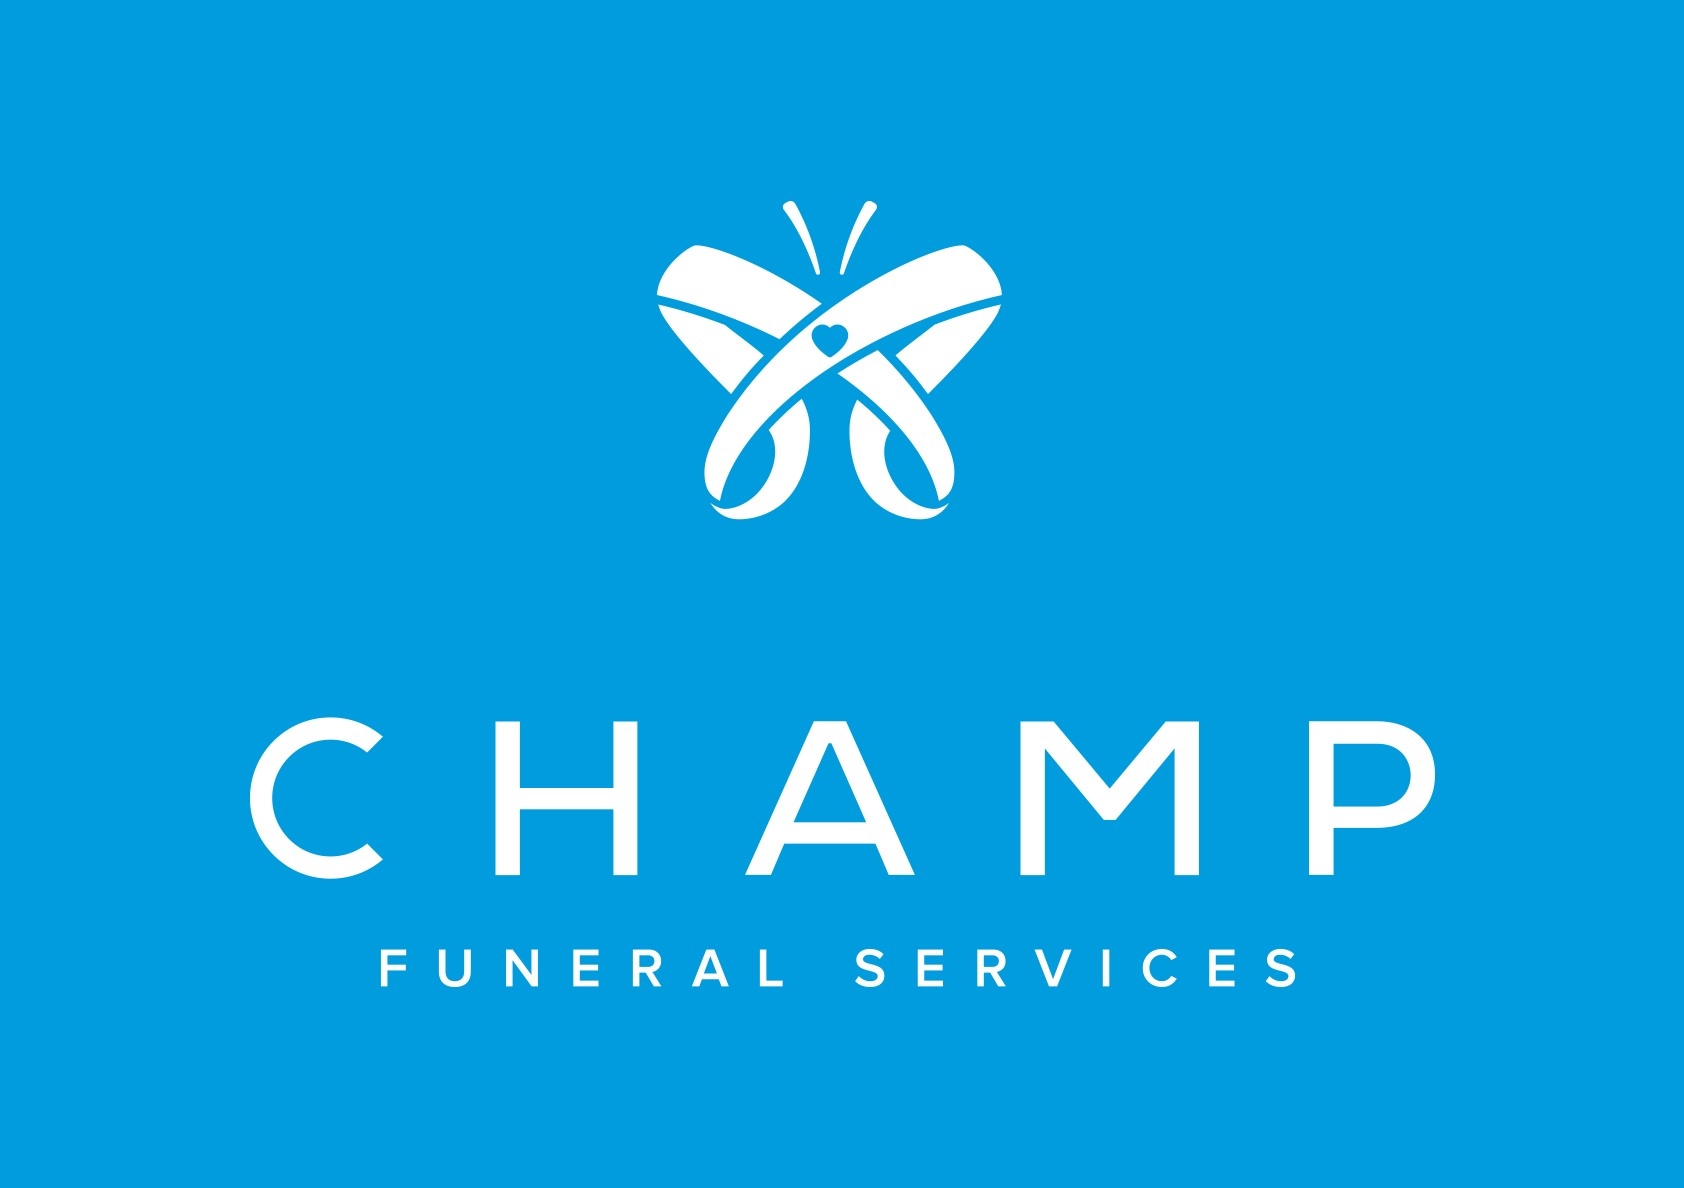 Champ Funeral Services